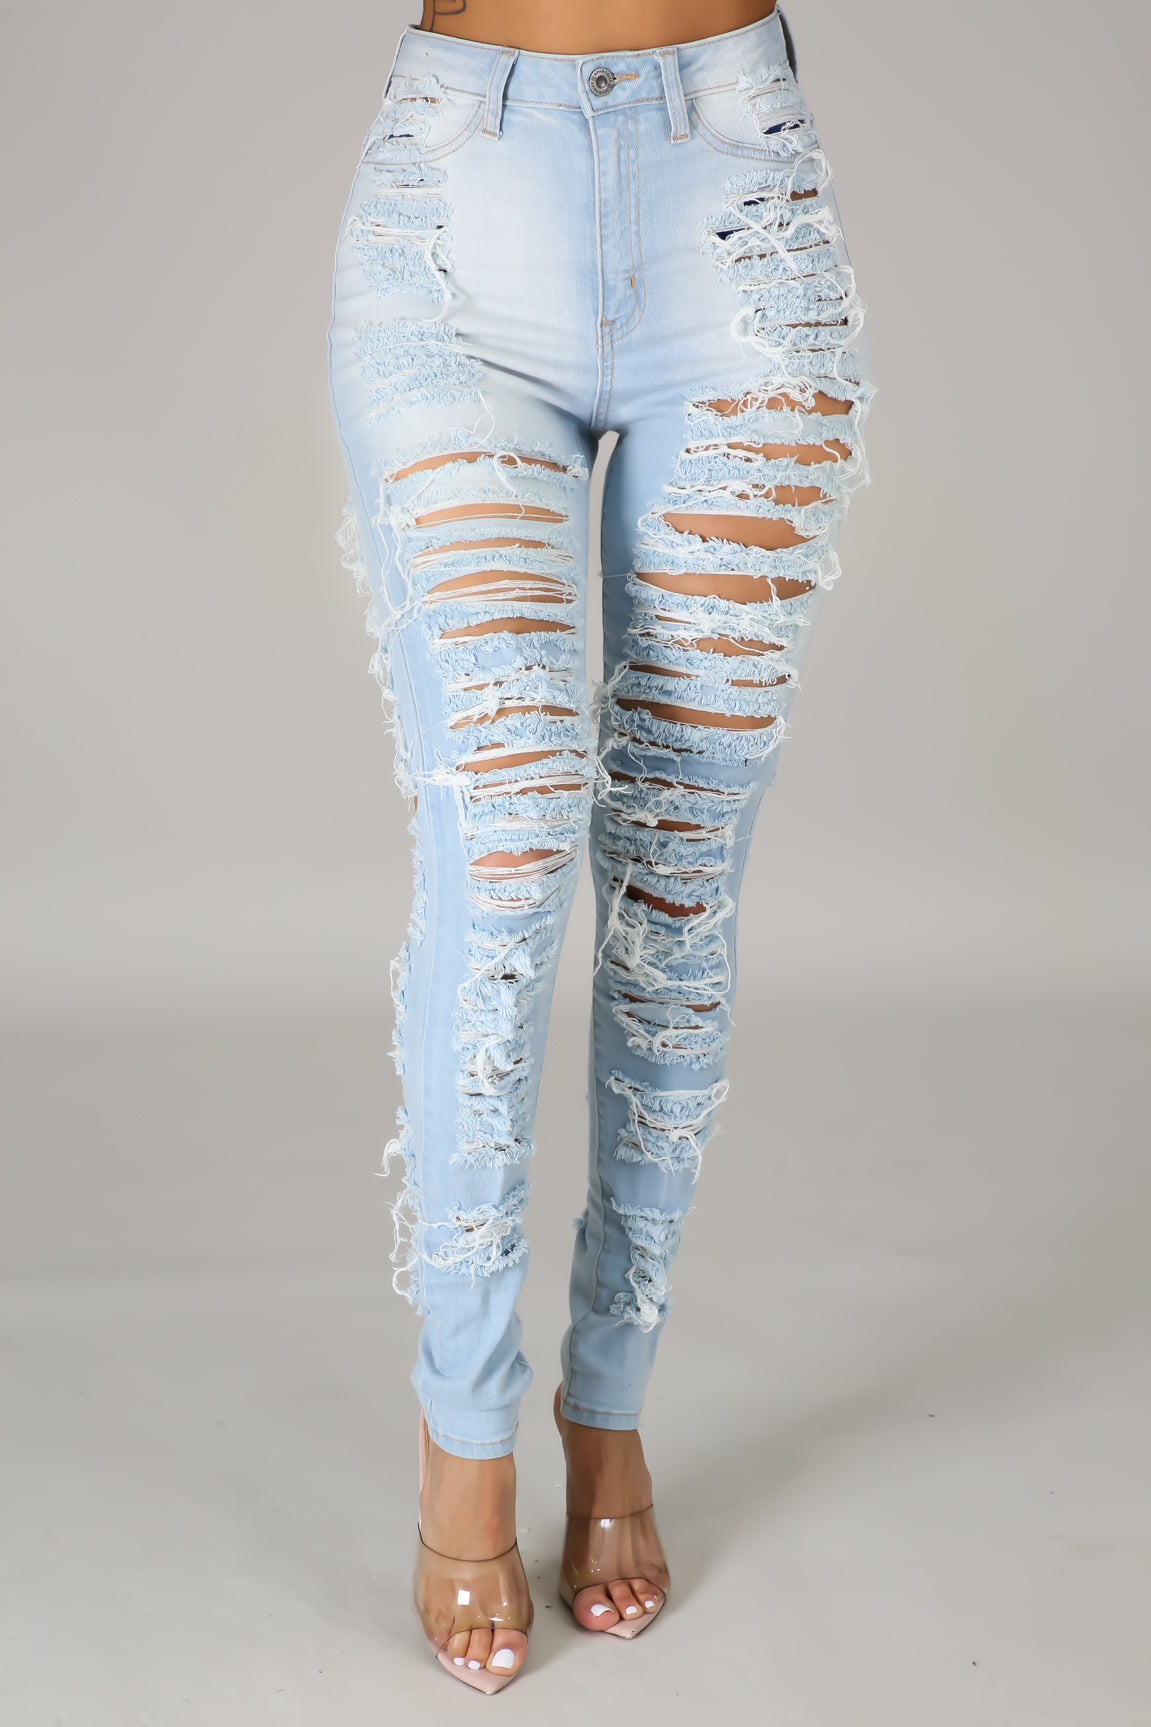 Pure Facts Jeans